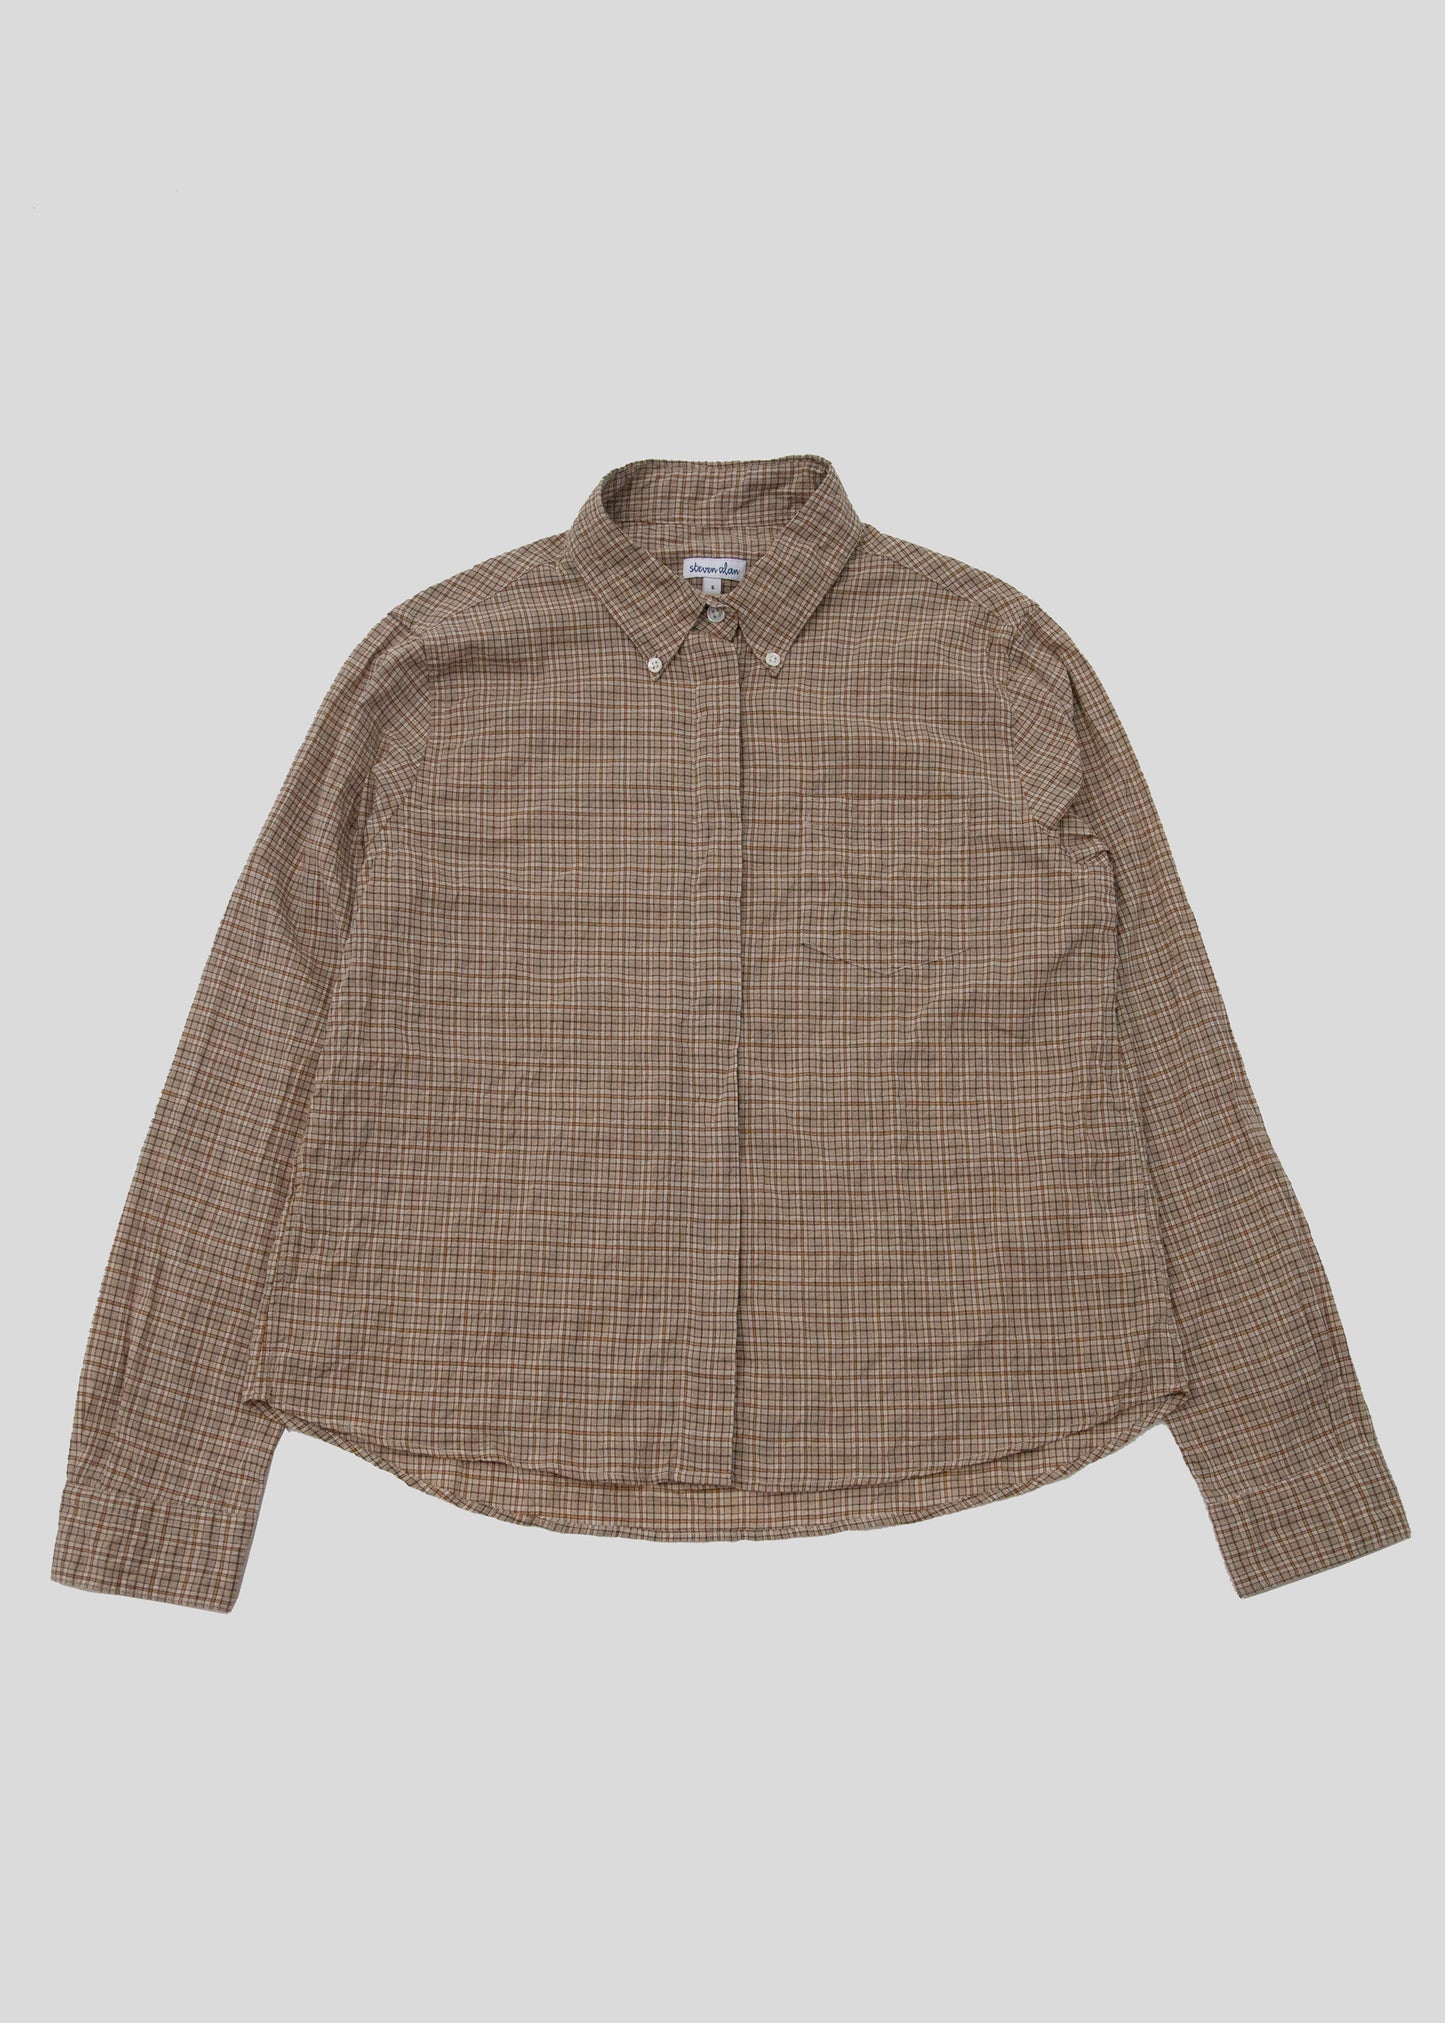 Front flat lay of fly shirt color in color natural check